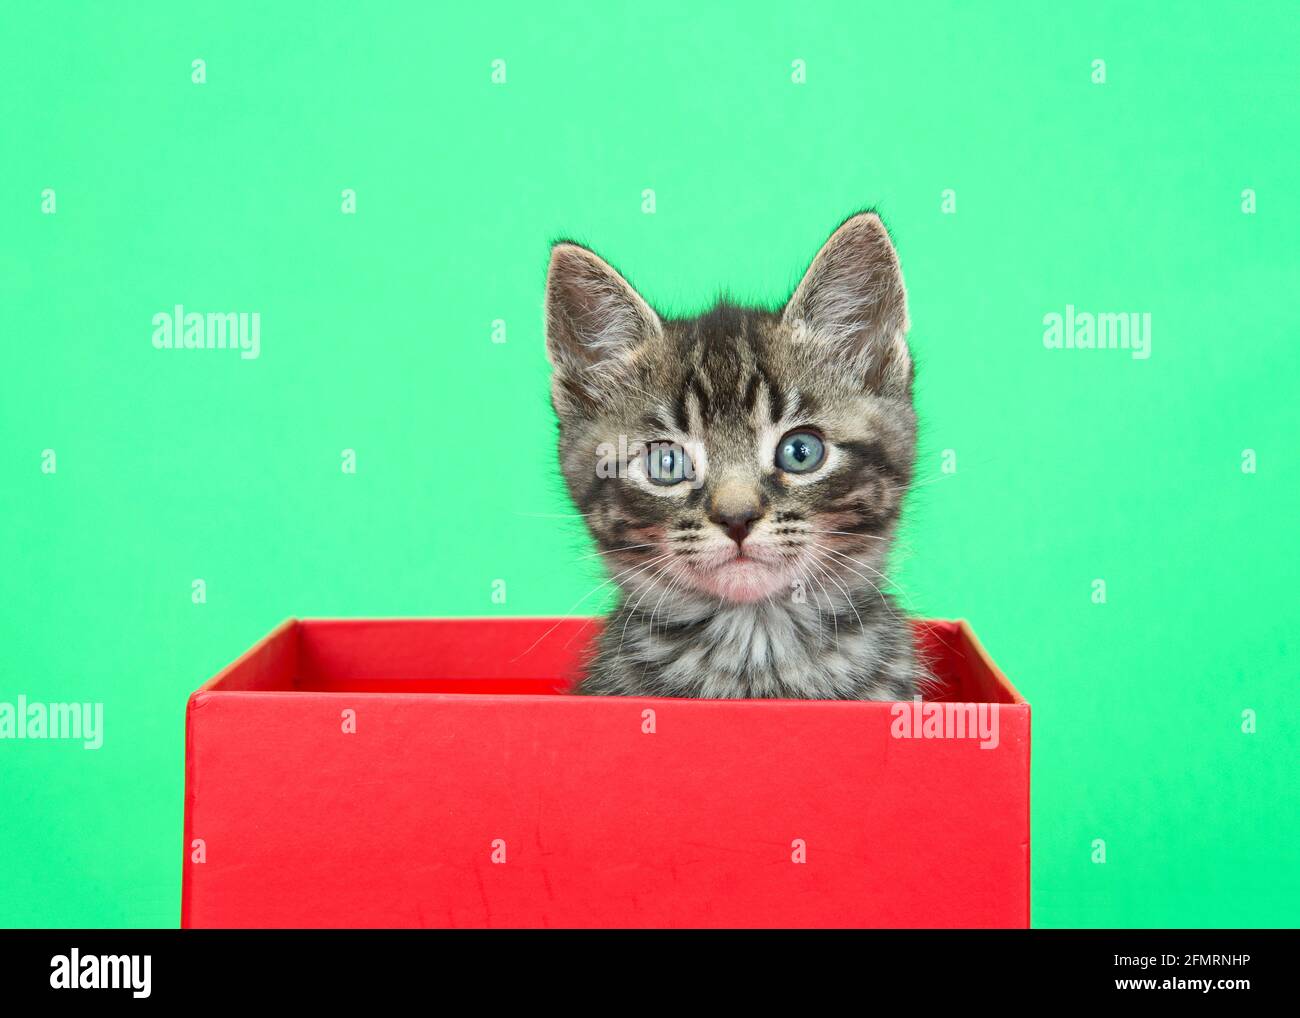 Close up of an adorable grey, black and brown tabby kitten peaking out of a red holiday box with green background. Looking directly at viewer with cur Stock Photo